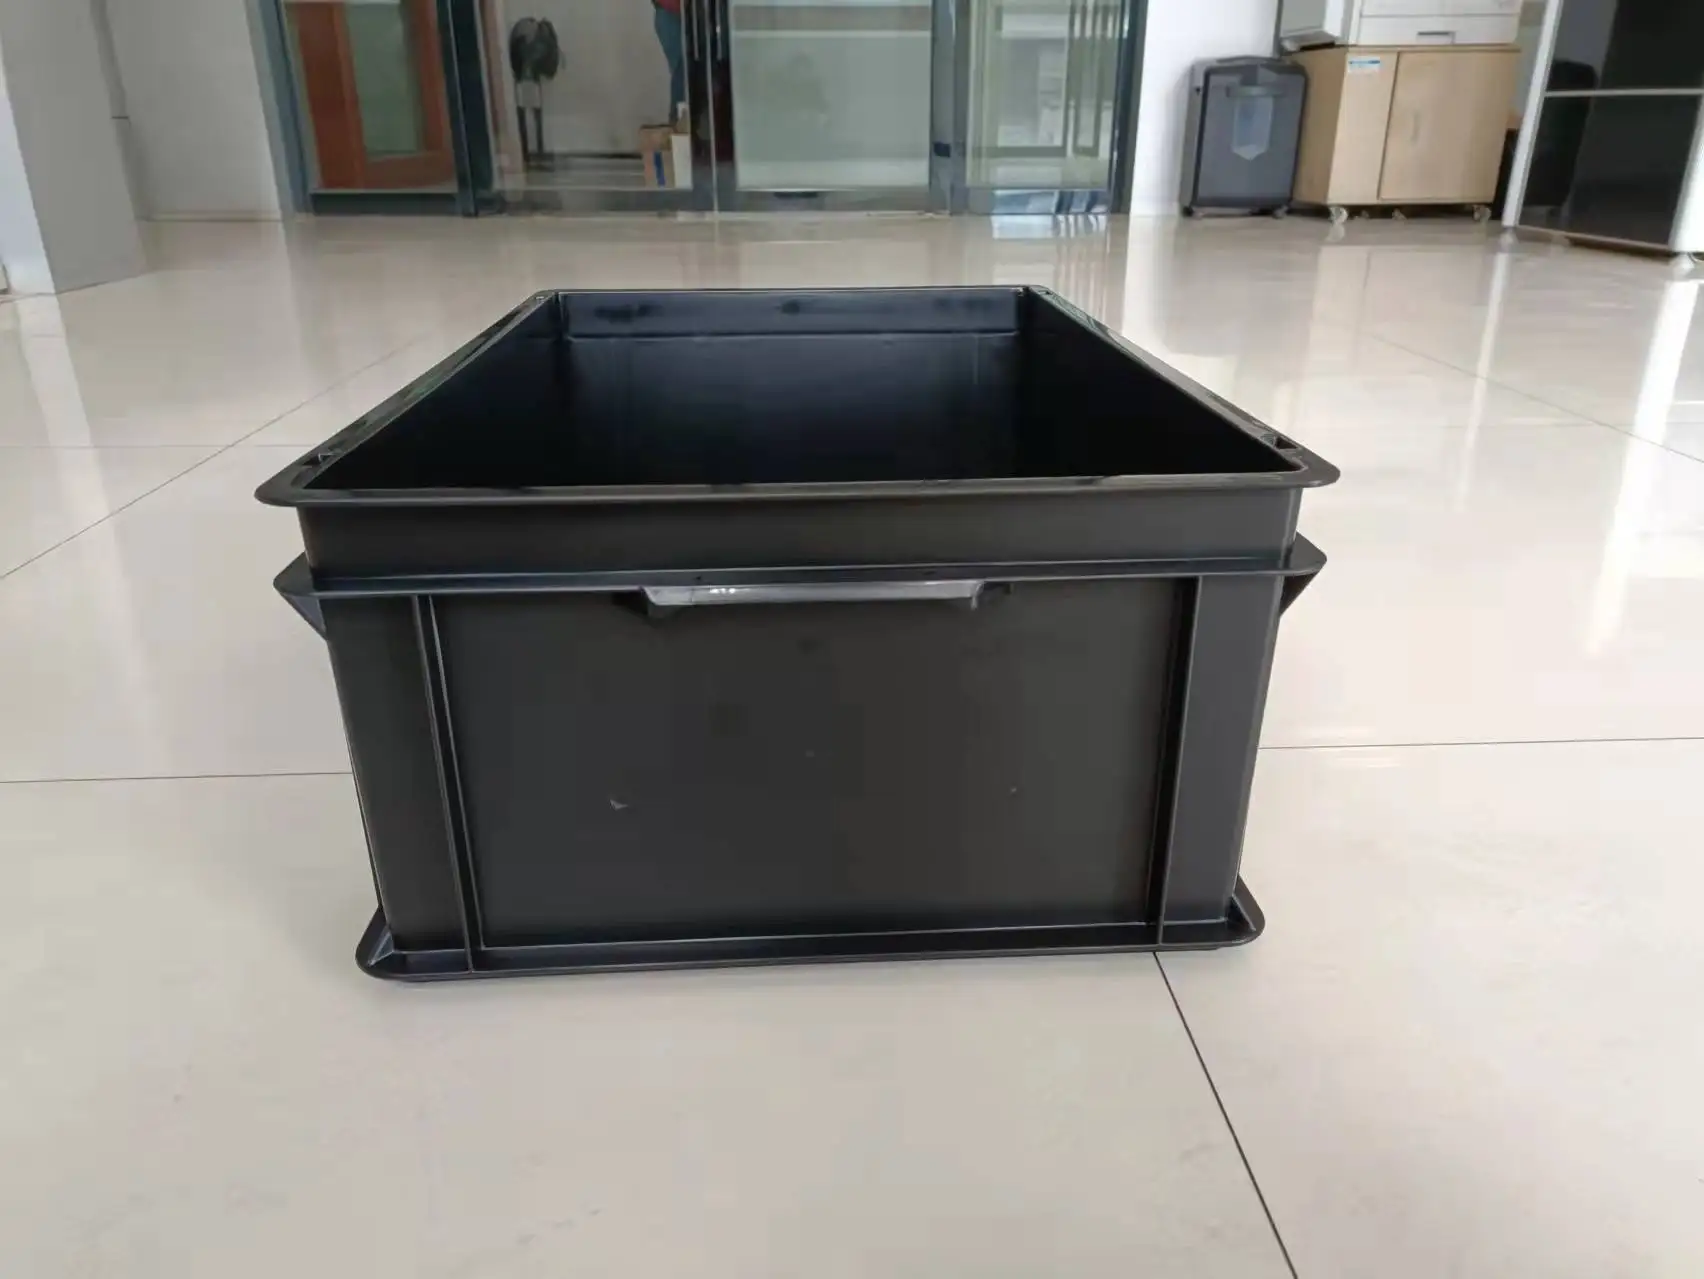 CONCO durable thick esd antistatic pp plastic boxes 600 x 400 x 220 mm with lid and lock device .